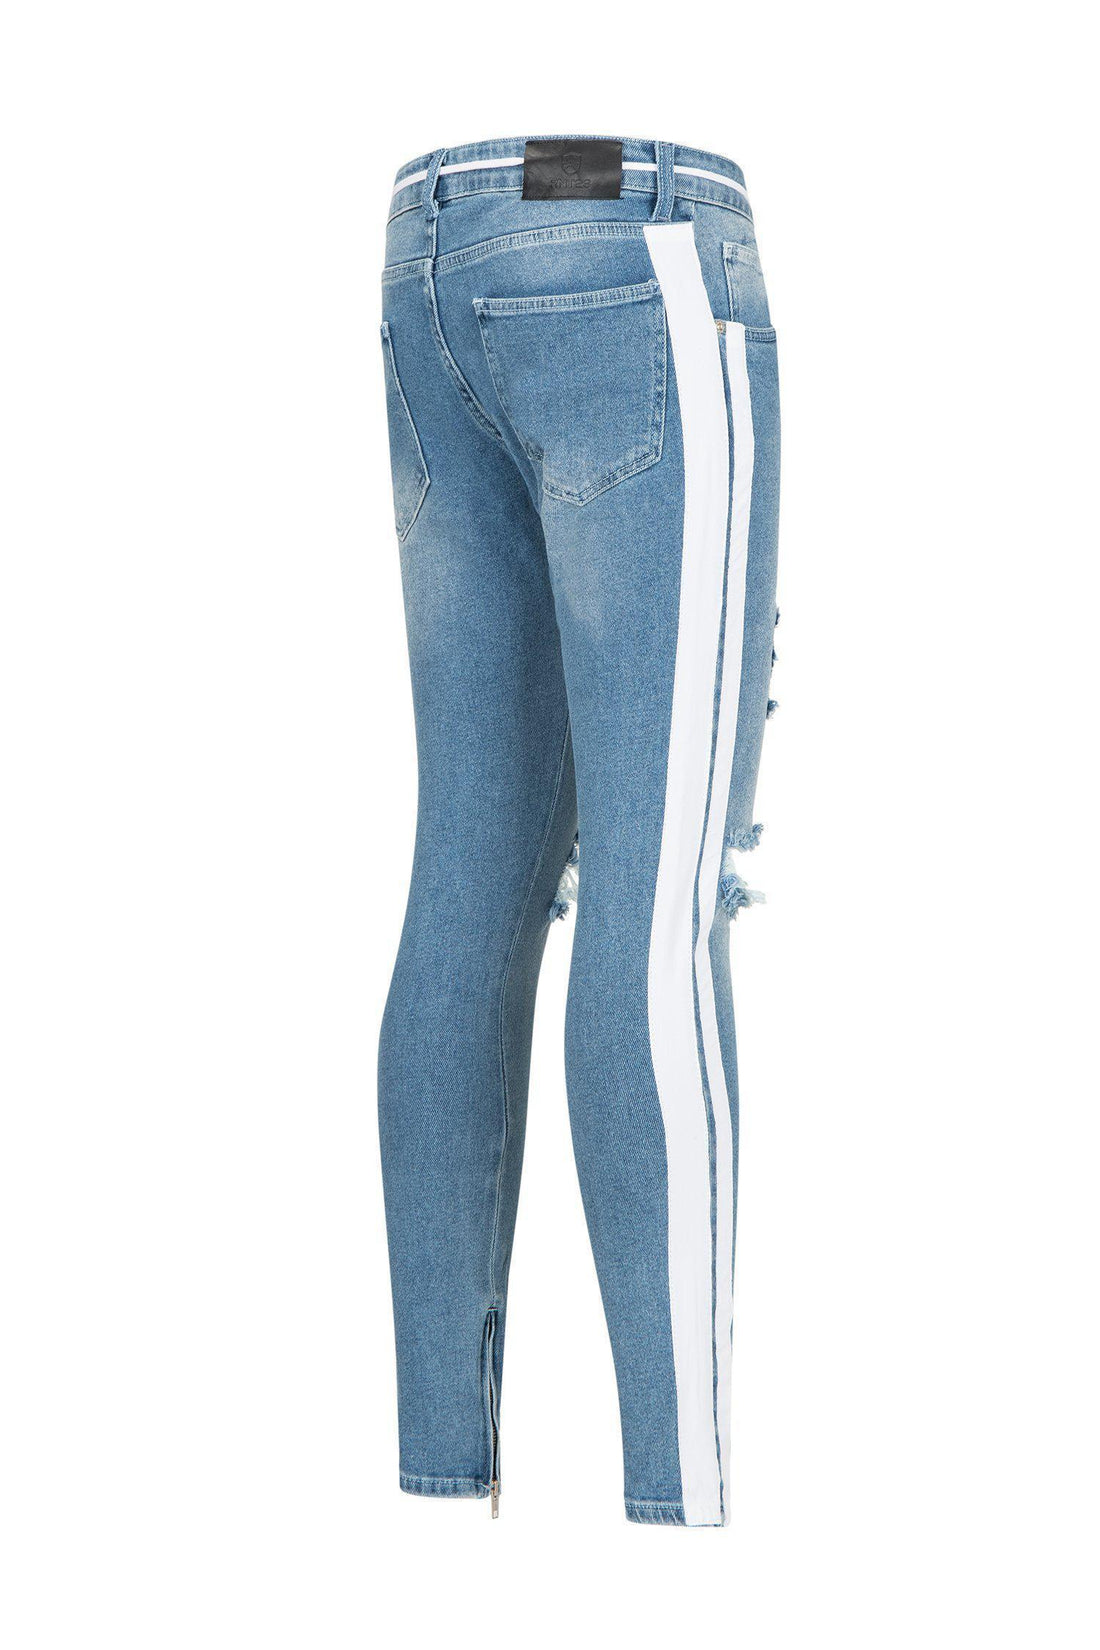 SKINNY FIT DISTRESSED LIGHT BLUE TRACK JEANS - Ron Tomson